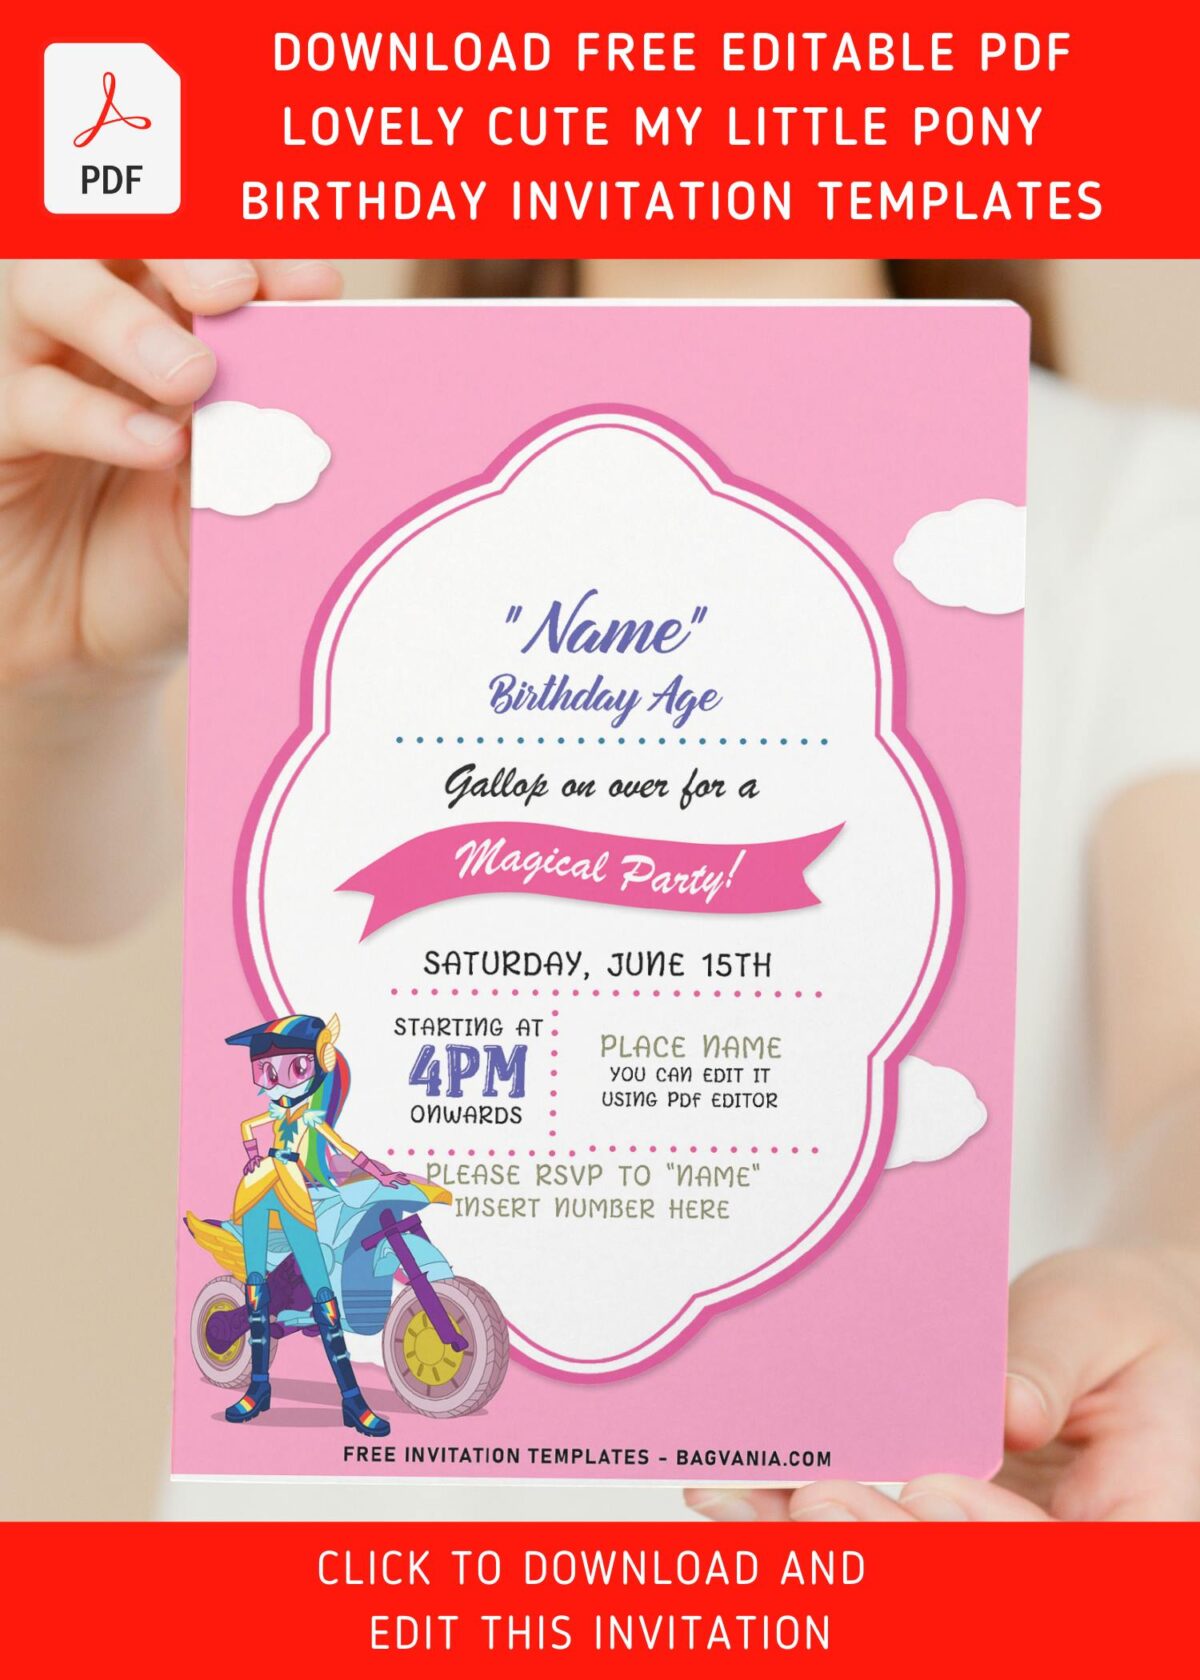 (Free Editable PDF) Lovely Cute My Little Pony Birthday Invitation Templates with rainbow dash and her motorbike